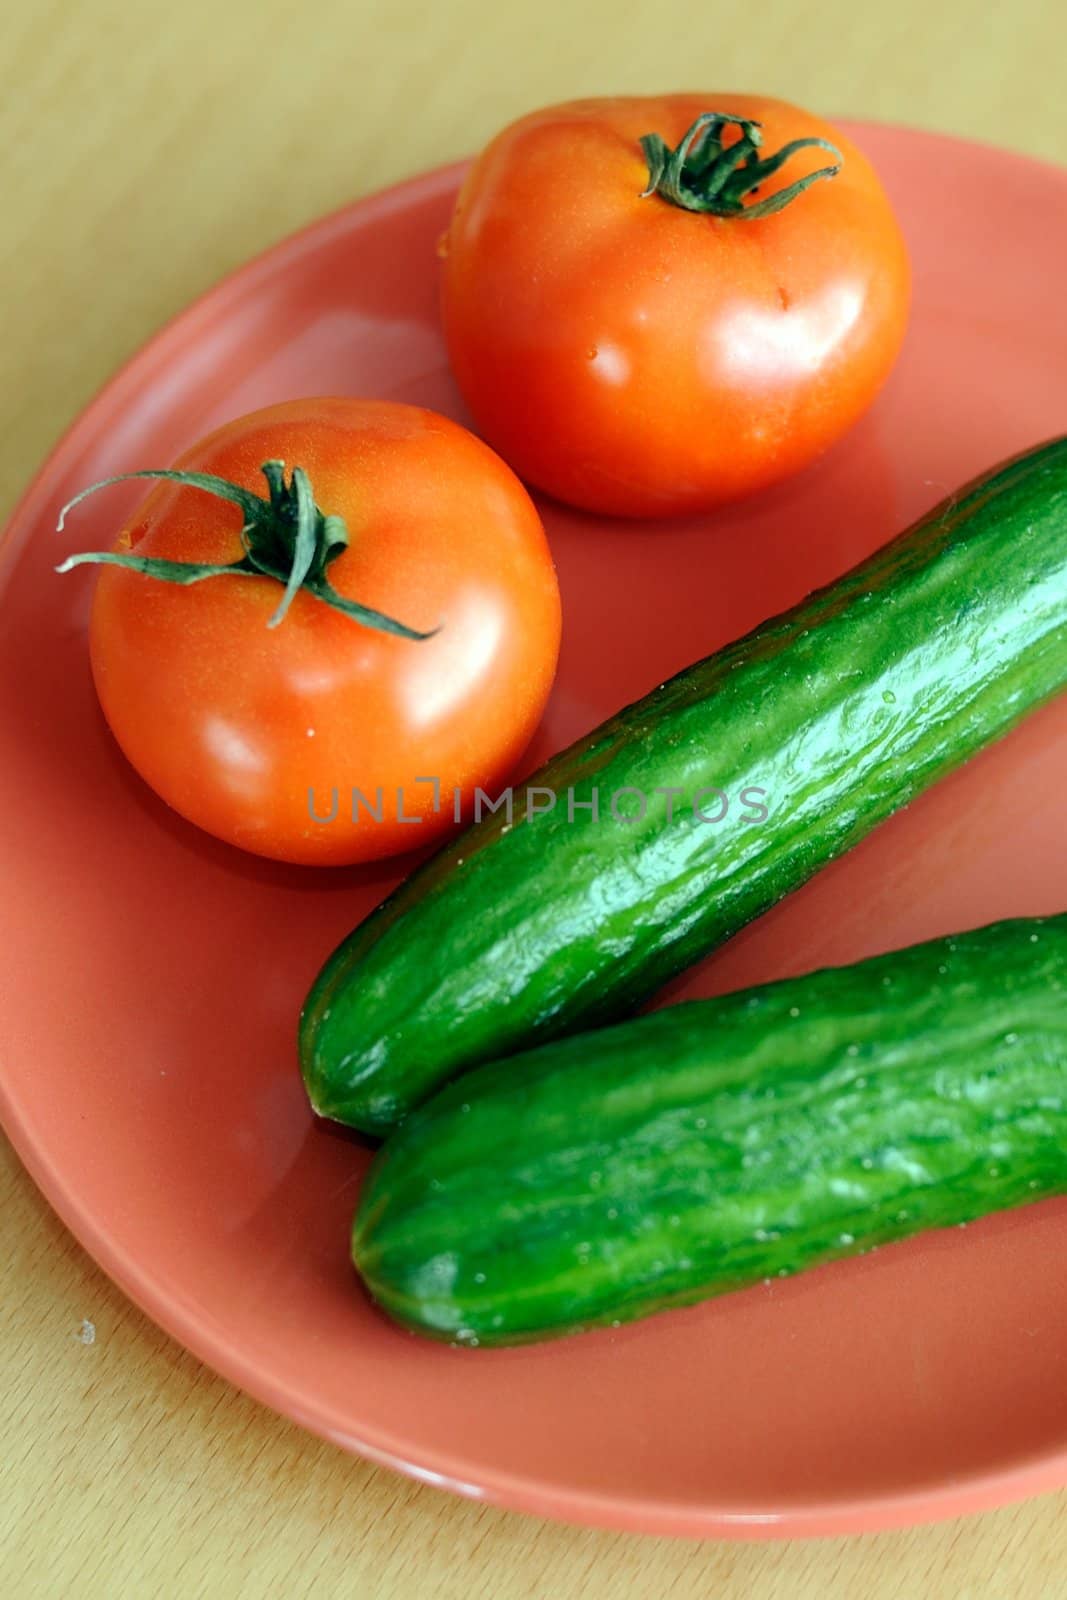 An image of tomatoes with cucumbers on plate